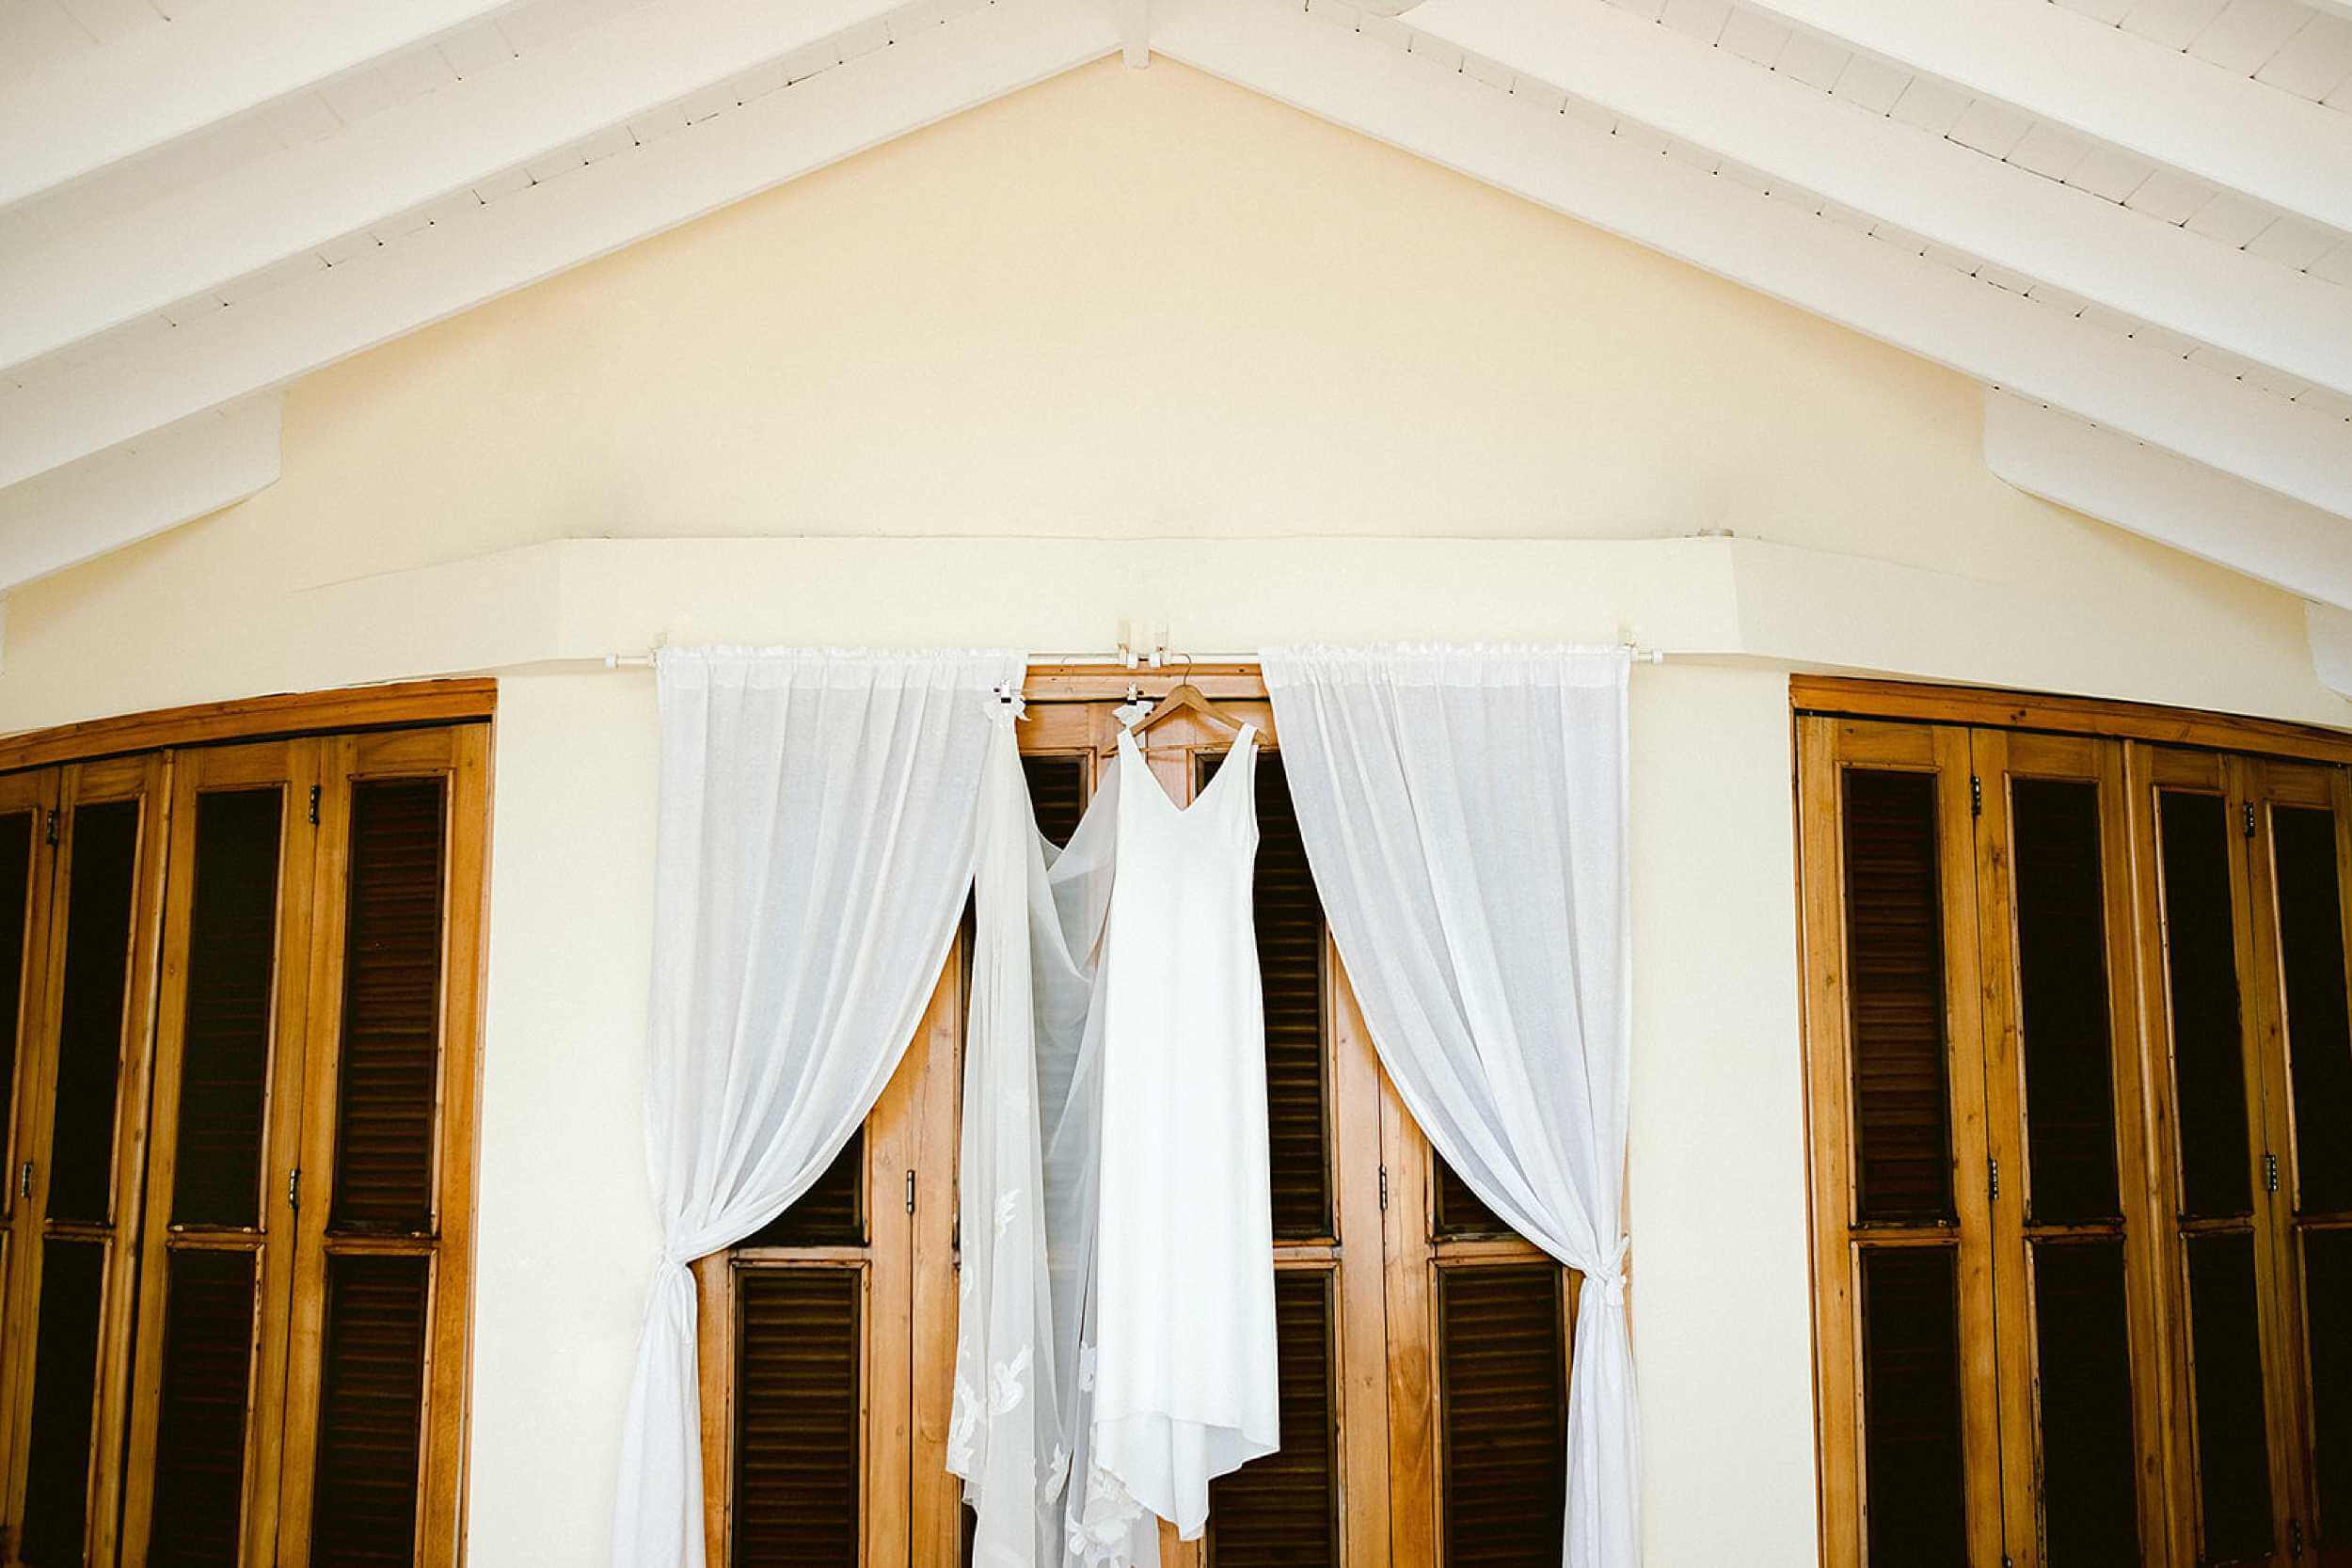 A beautiful wedding dress hanging from the balcony - The Dominican Republic wedding photographer